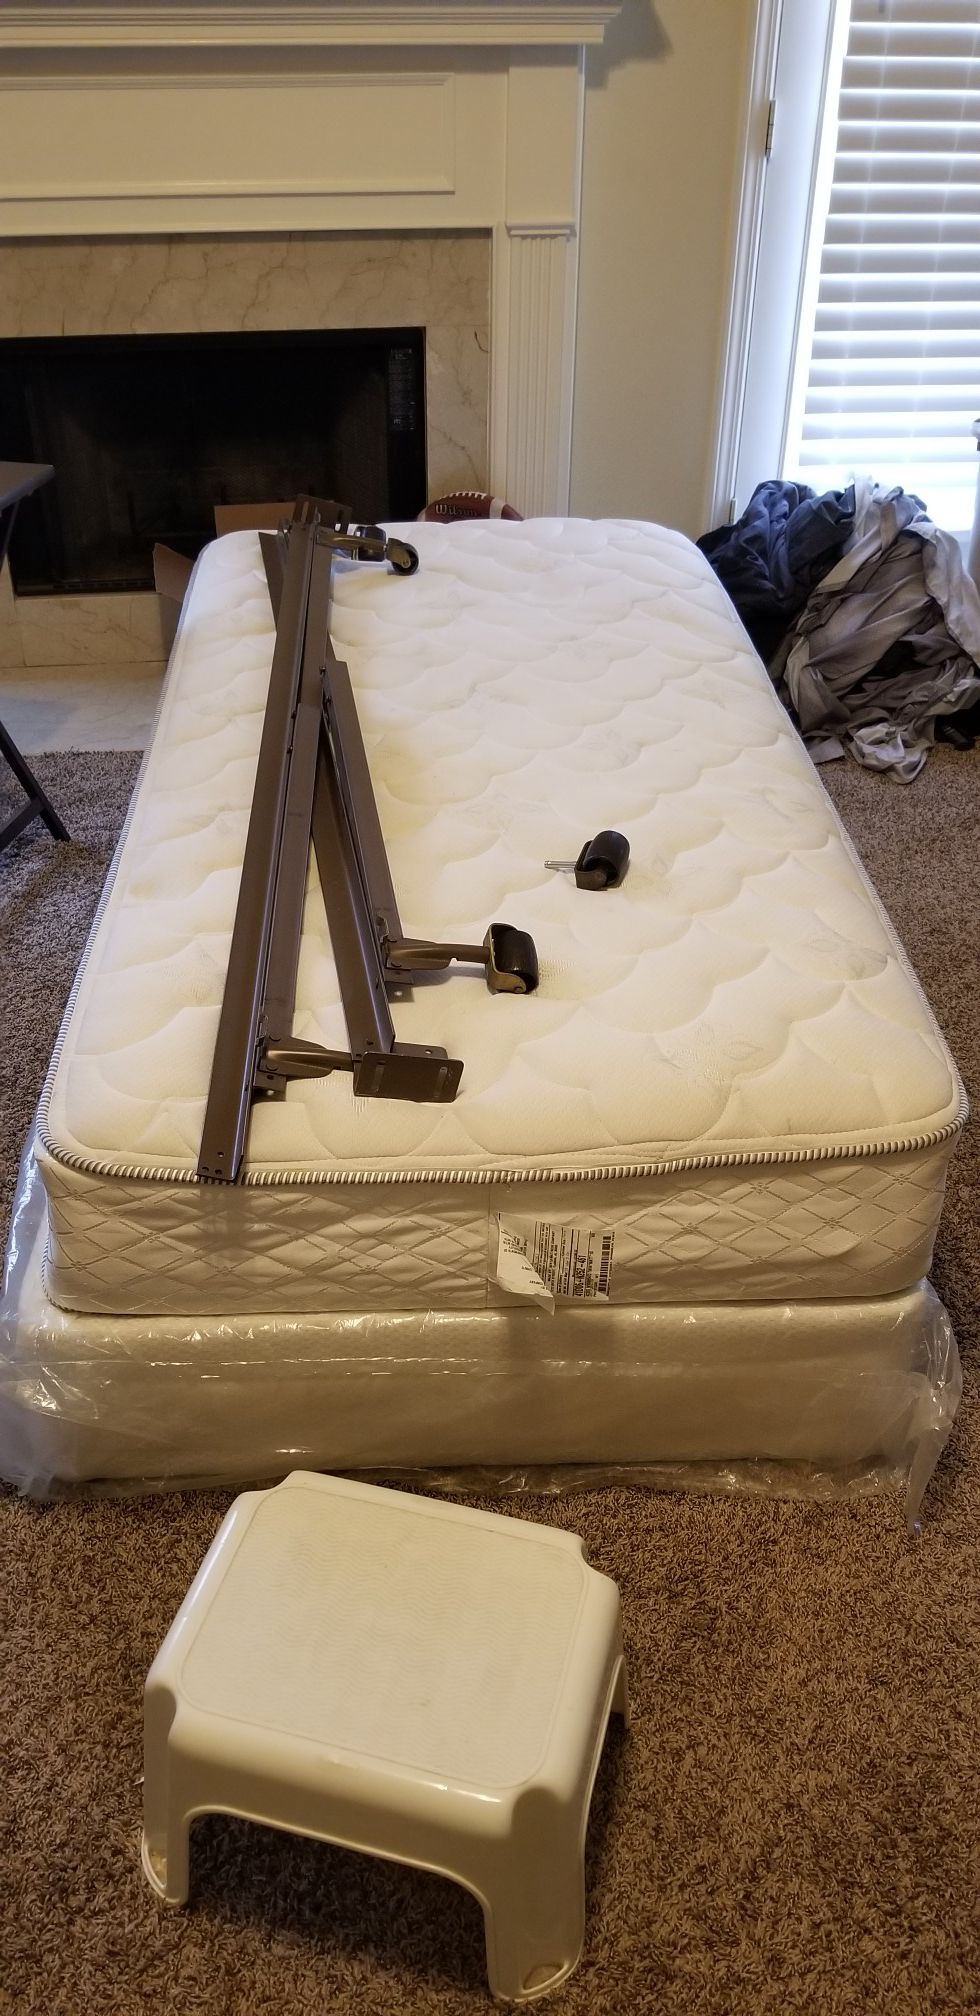 Twin Size bed